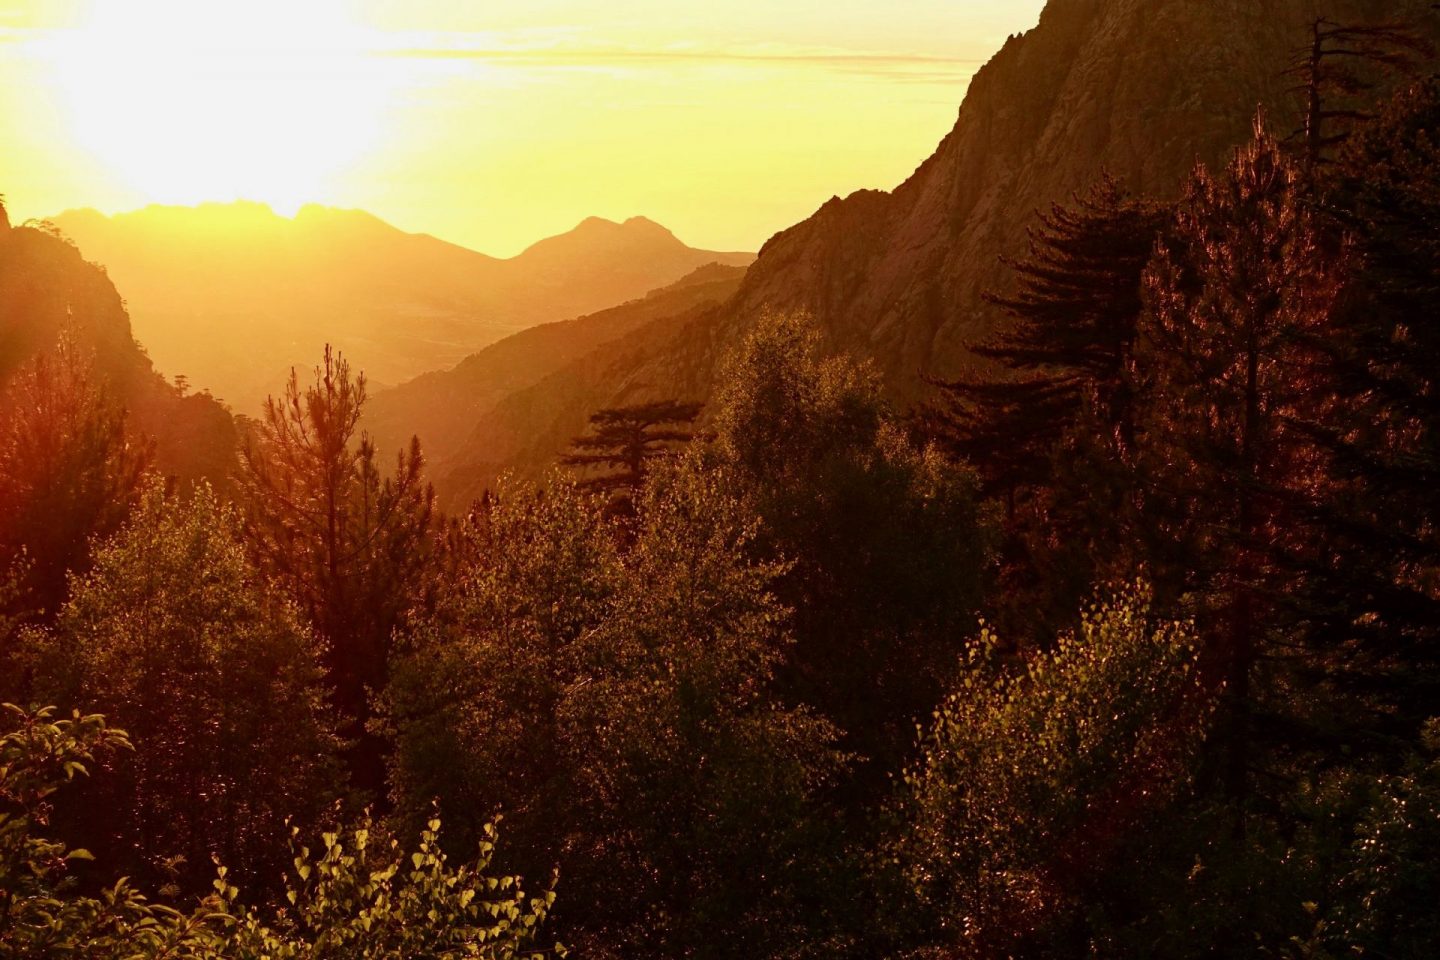 A beautiful sunset view over mountains and trees, with an orange sky